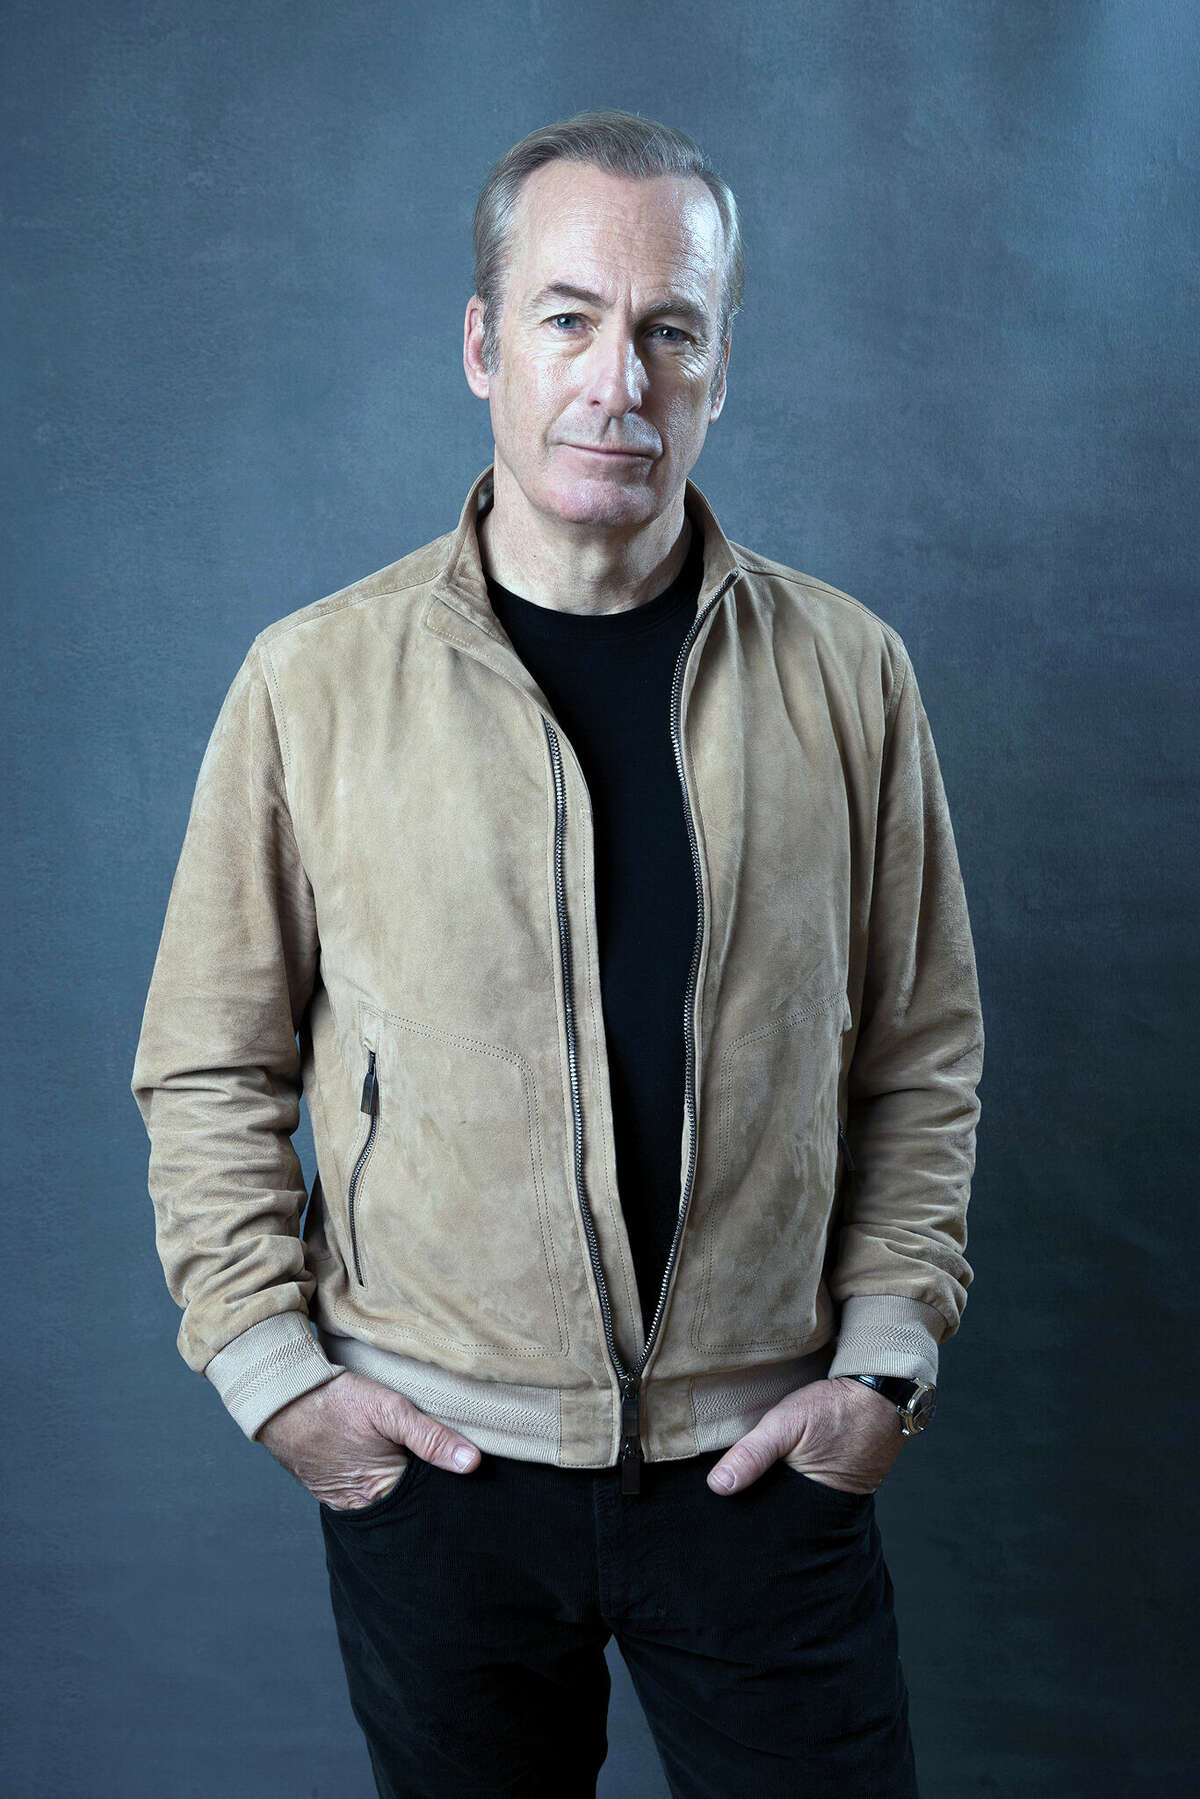 Bob Odenkirk, a cast member in the AMC television series "Lucky Hank," is trying to find a better work-life balance after having a heart attack in 2021.